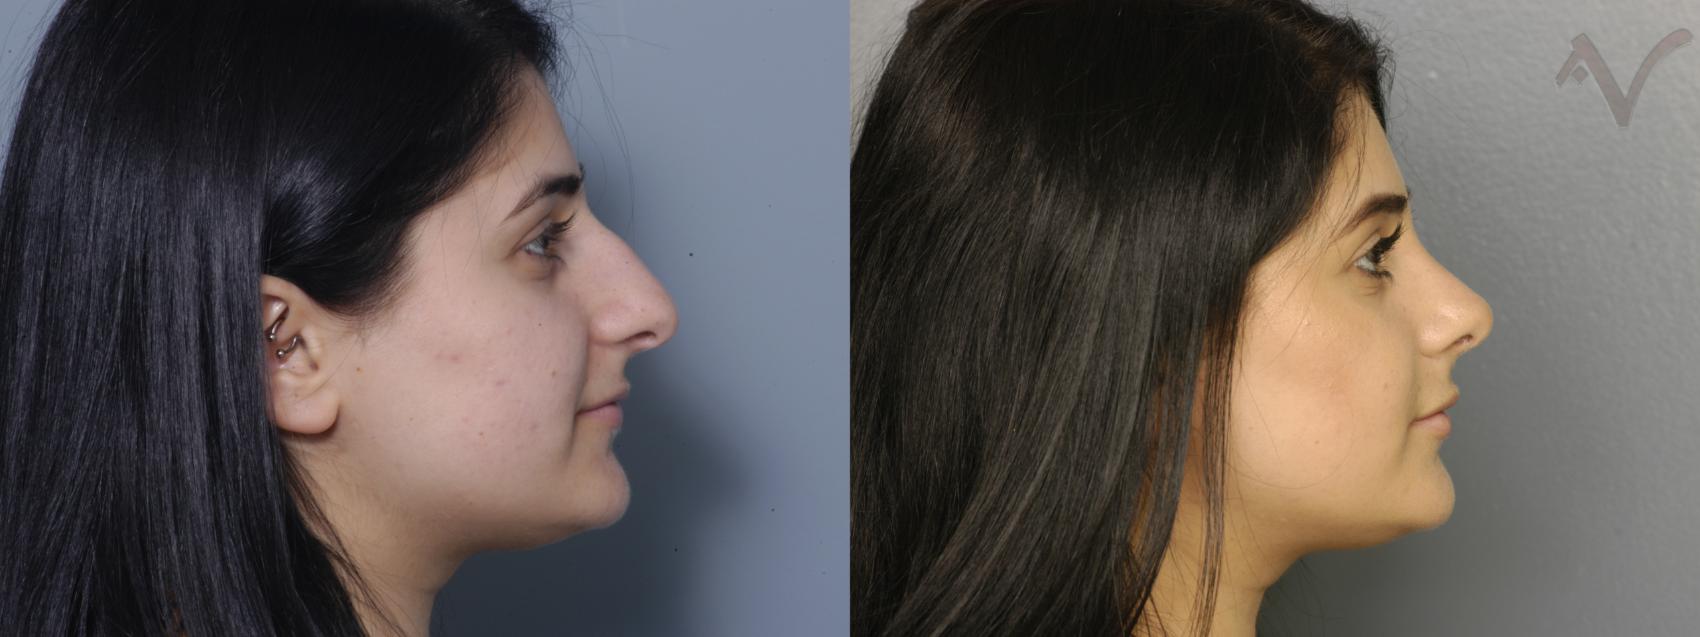 Before & After Rhinoplasty Case 4 Right Side View in Los Angeles, CA